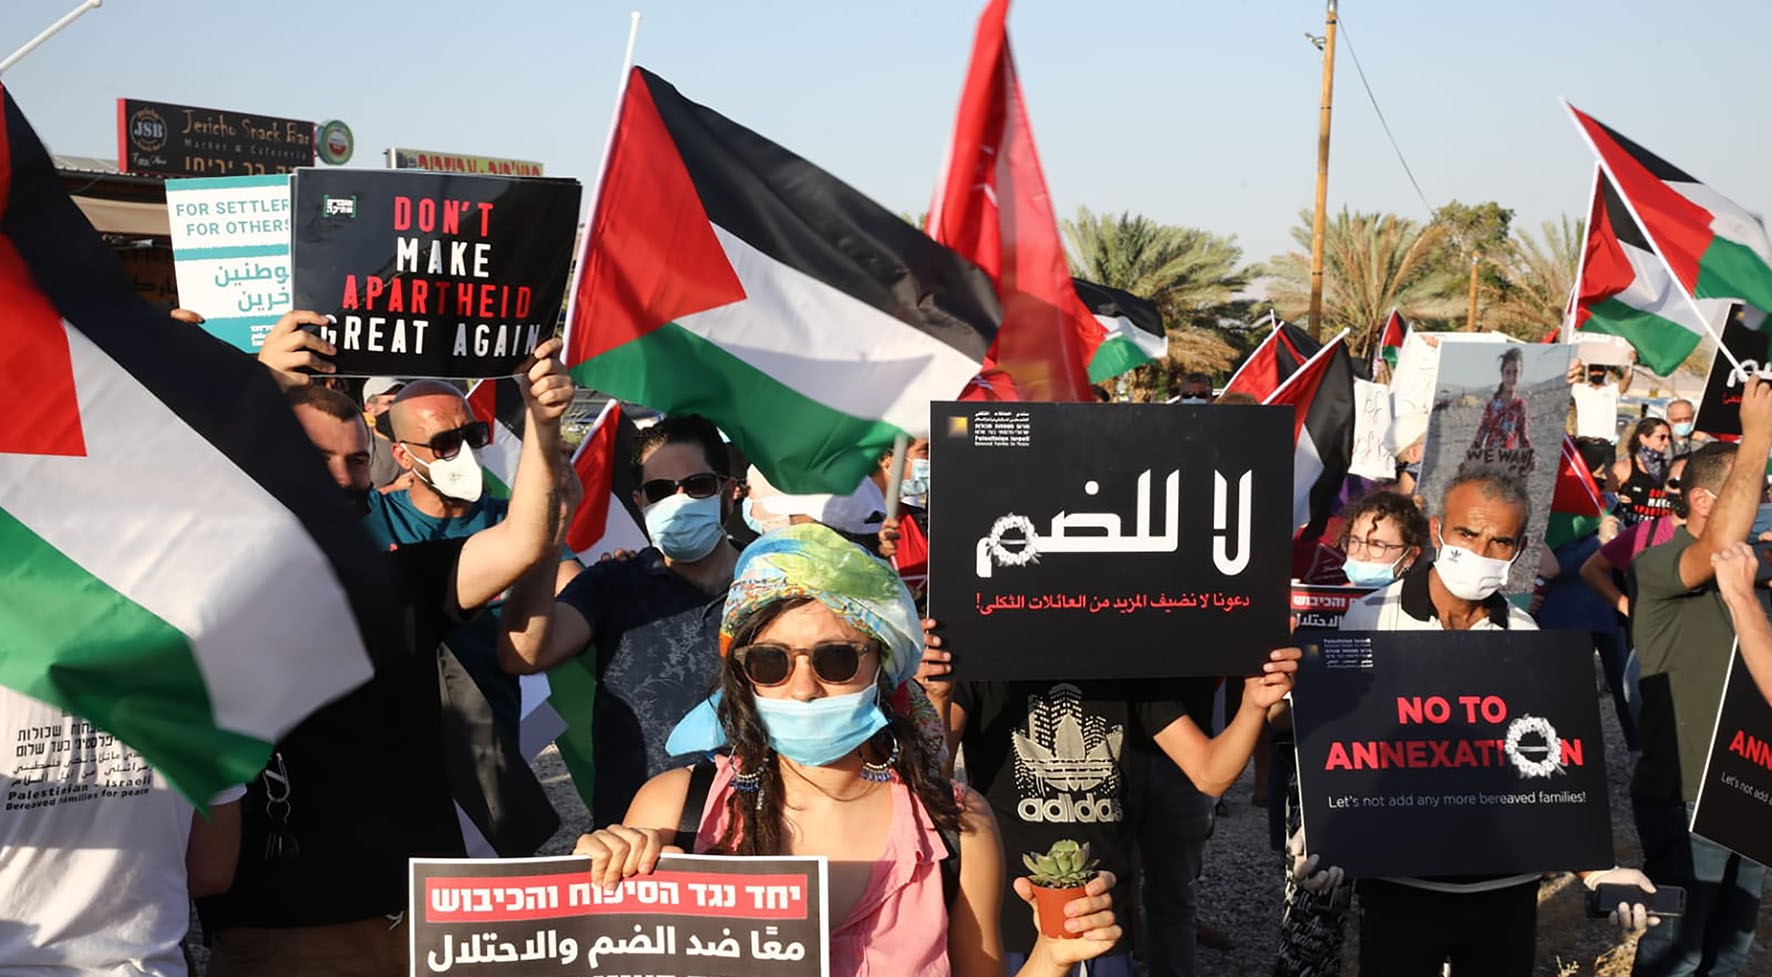 Palestinian and Israeli activists protest against the Israeli occupation and annexation plans at Almog junction, north of the Dead Sea, an area at risk being annexed, June 28, 2020. The dual language sign held in the foreground reads: "Together against the annexation and the occupation."